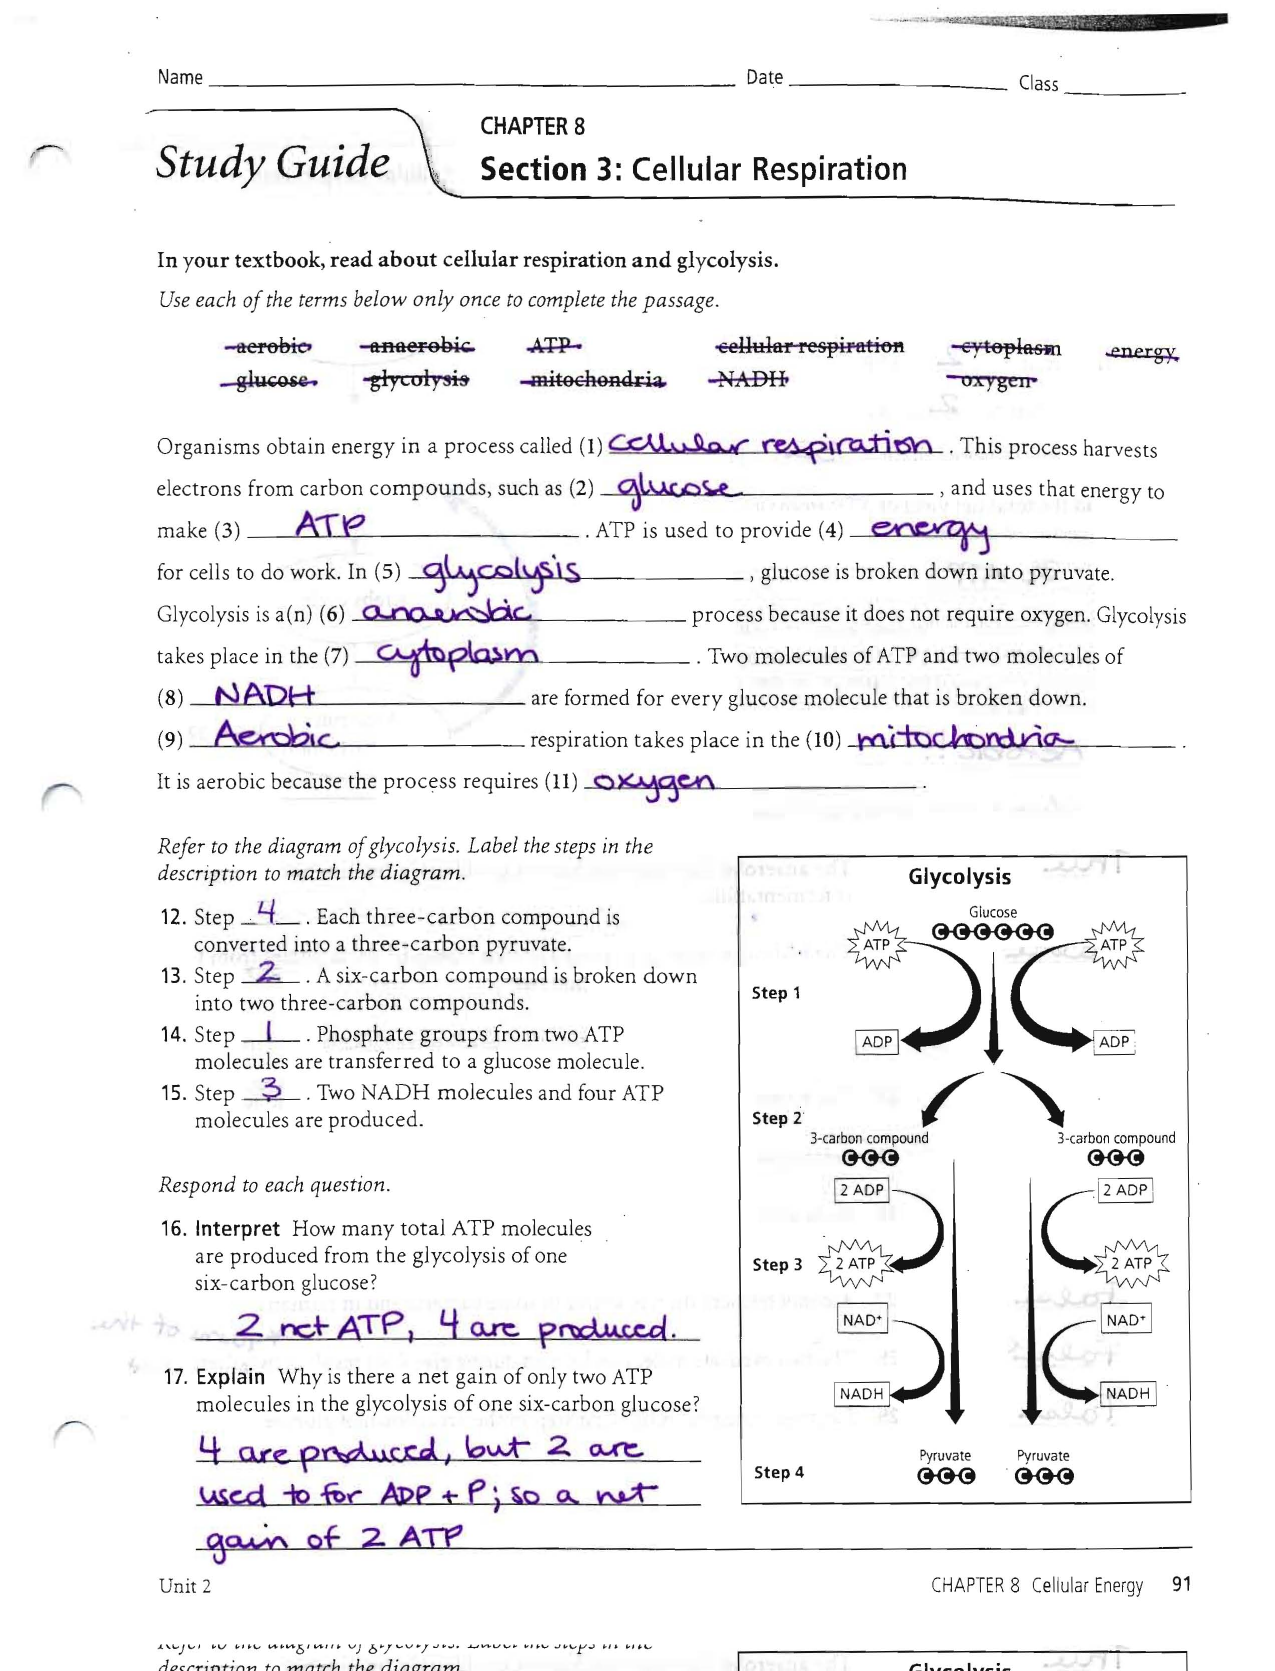 cellular respiration case study answers